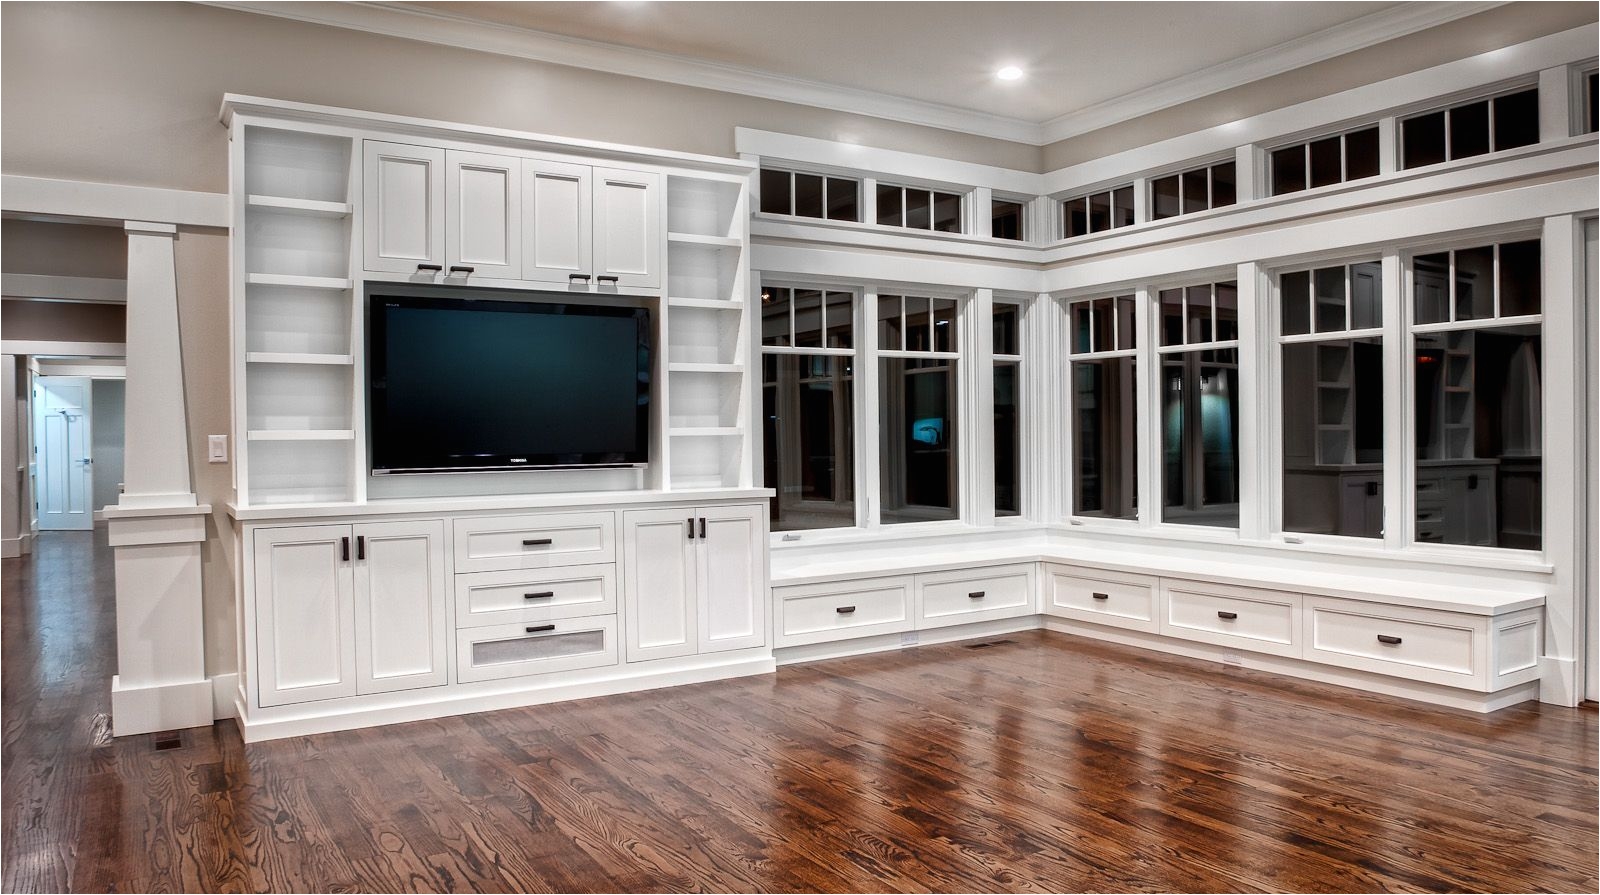 gorgeous custom entertainment center bookcases and built in window seat with amazing windows and transoms above